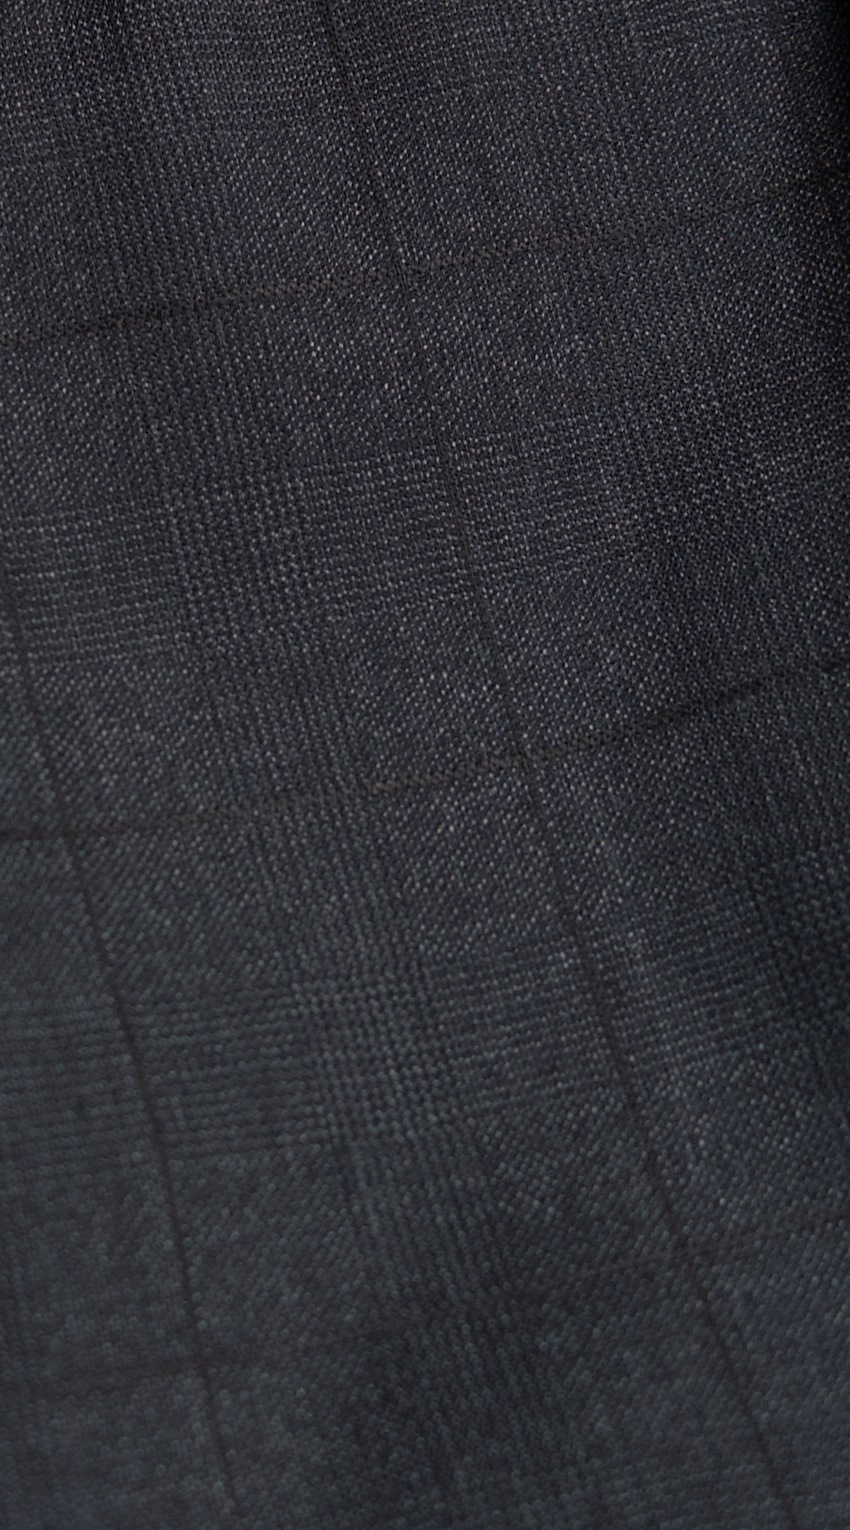 Charcoal Prince of Wales Check Suit